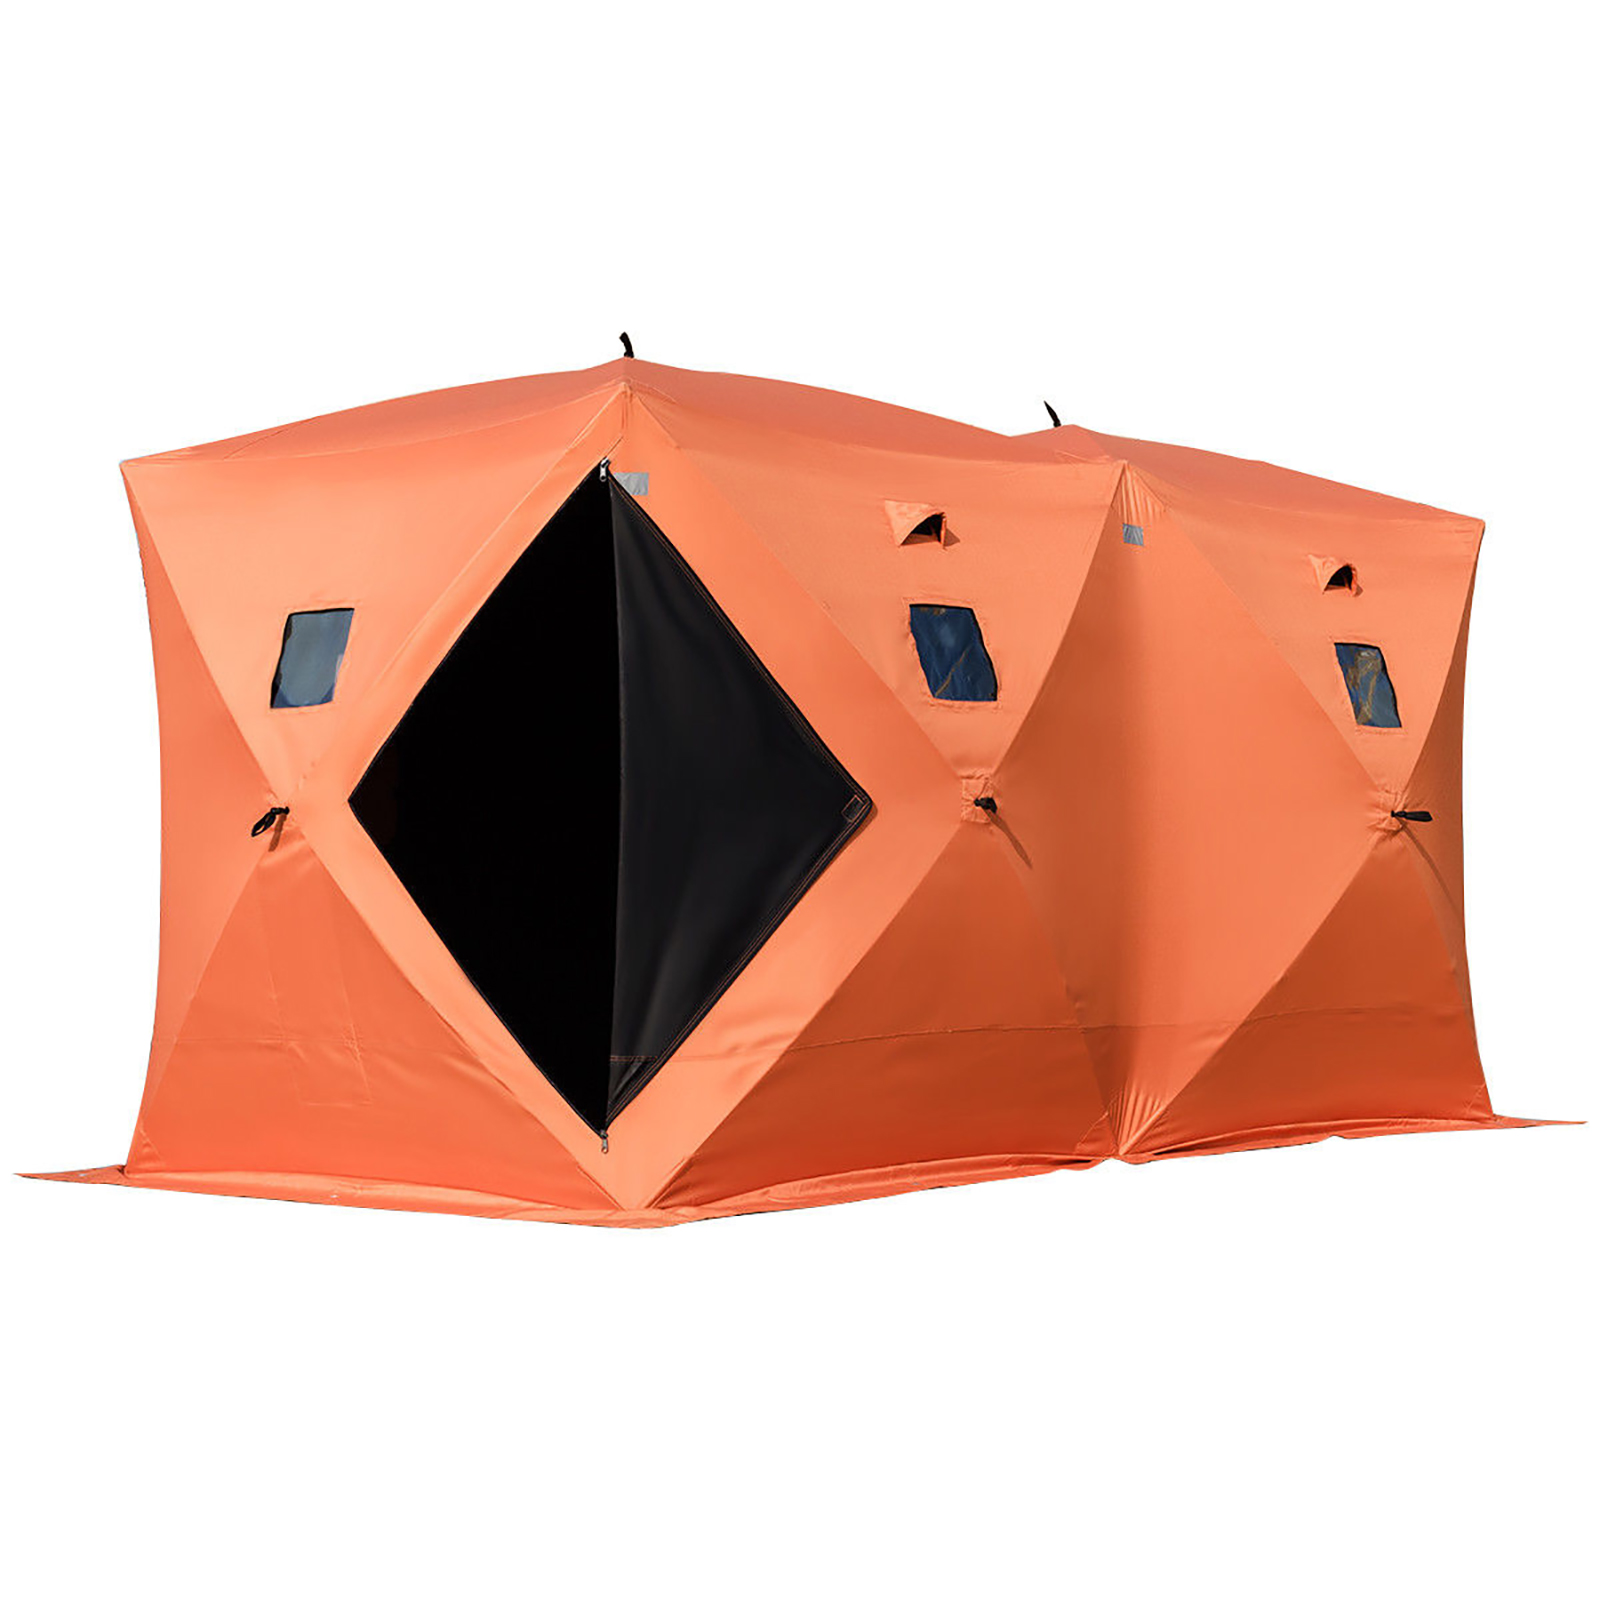 Ice Shelter Fishing Tent 8-person Pop-up Shanty Stability Room Lightweight от Vevor Many GEOs